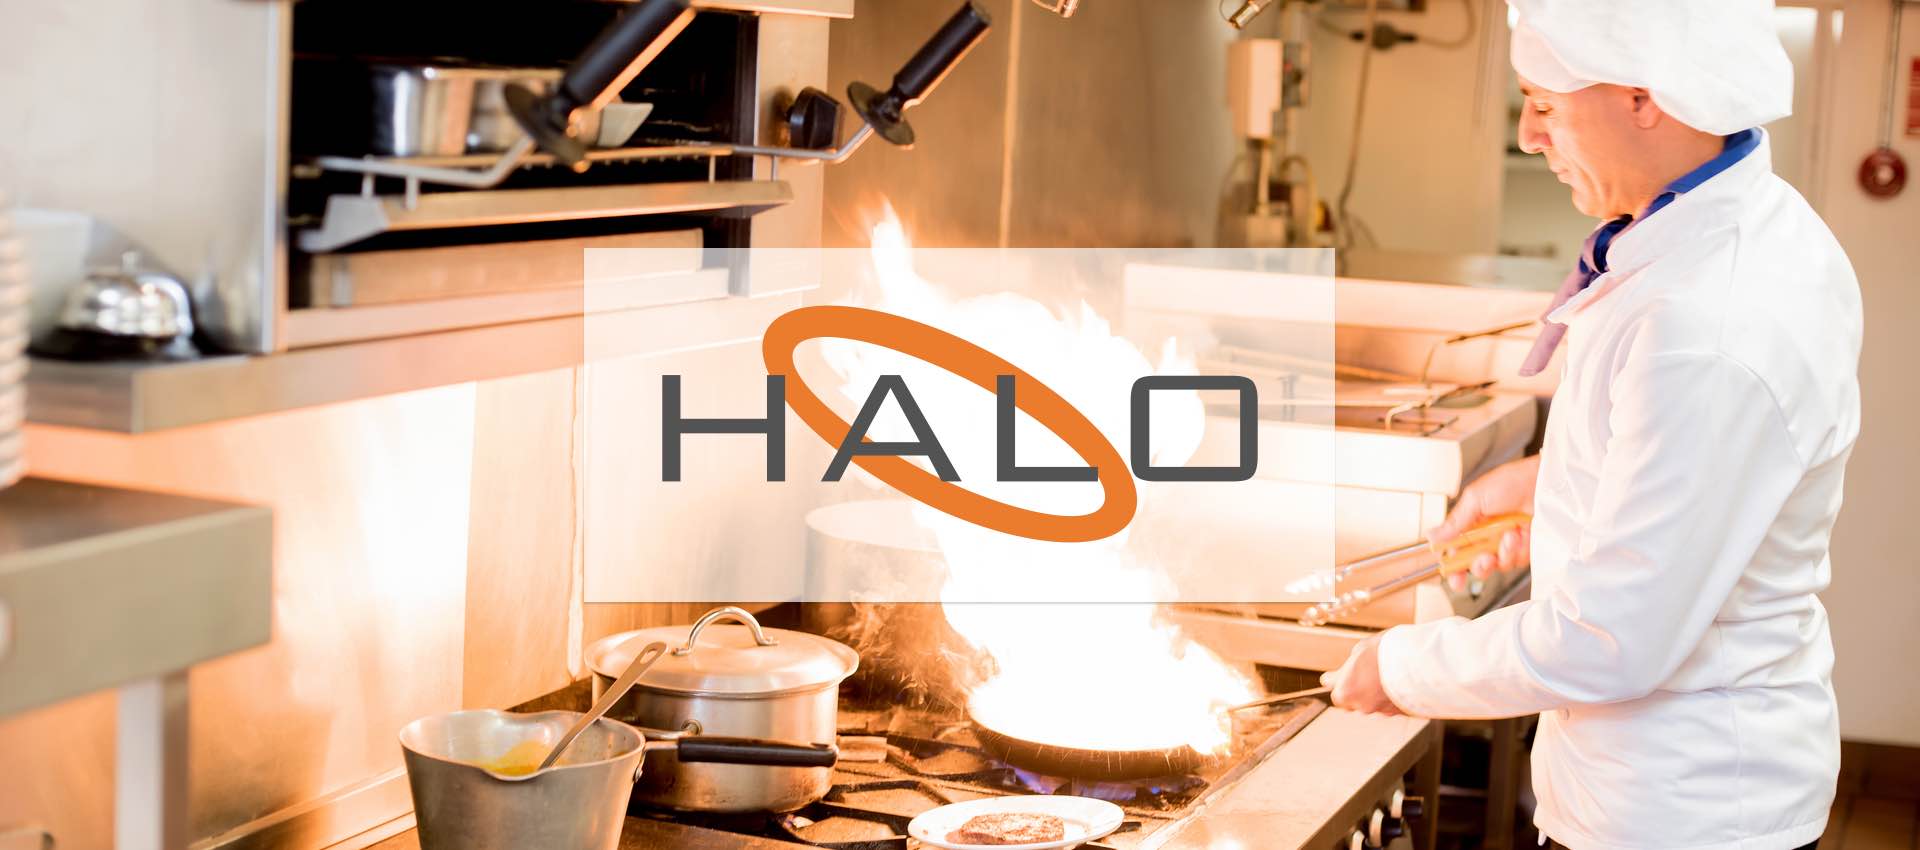 Halo Restoration Services Featured in Cleaning & Maintenance Management